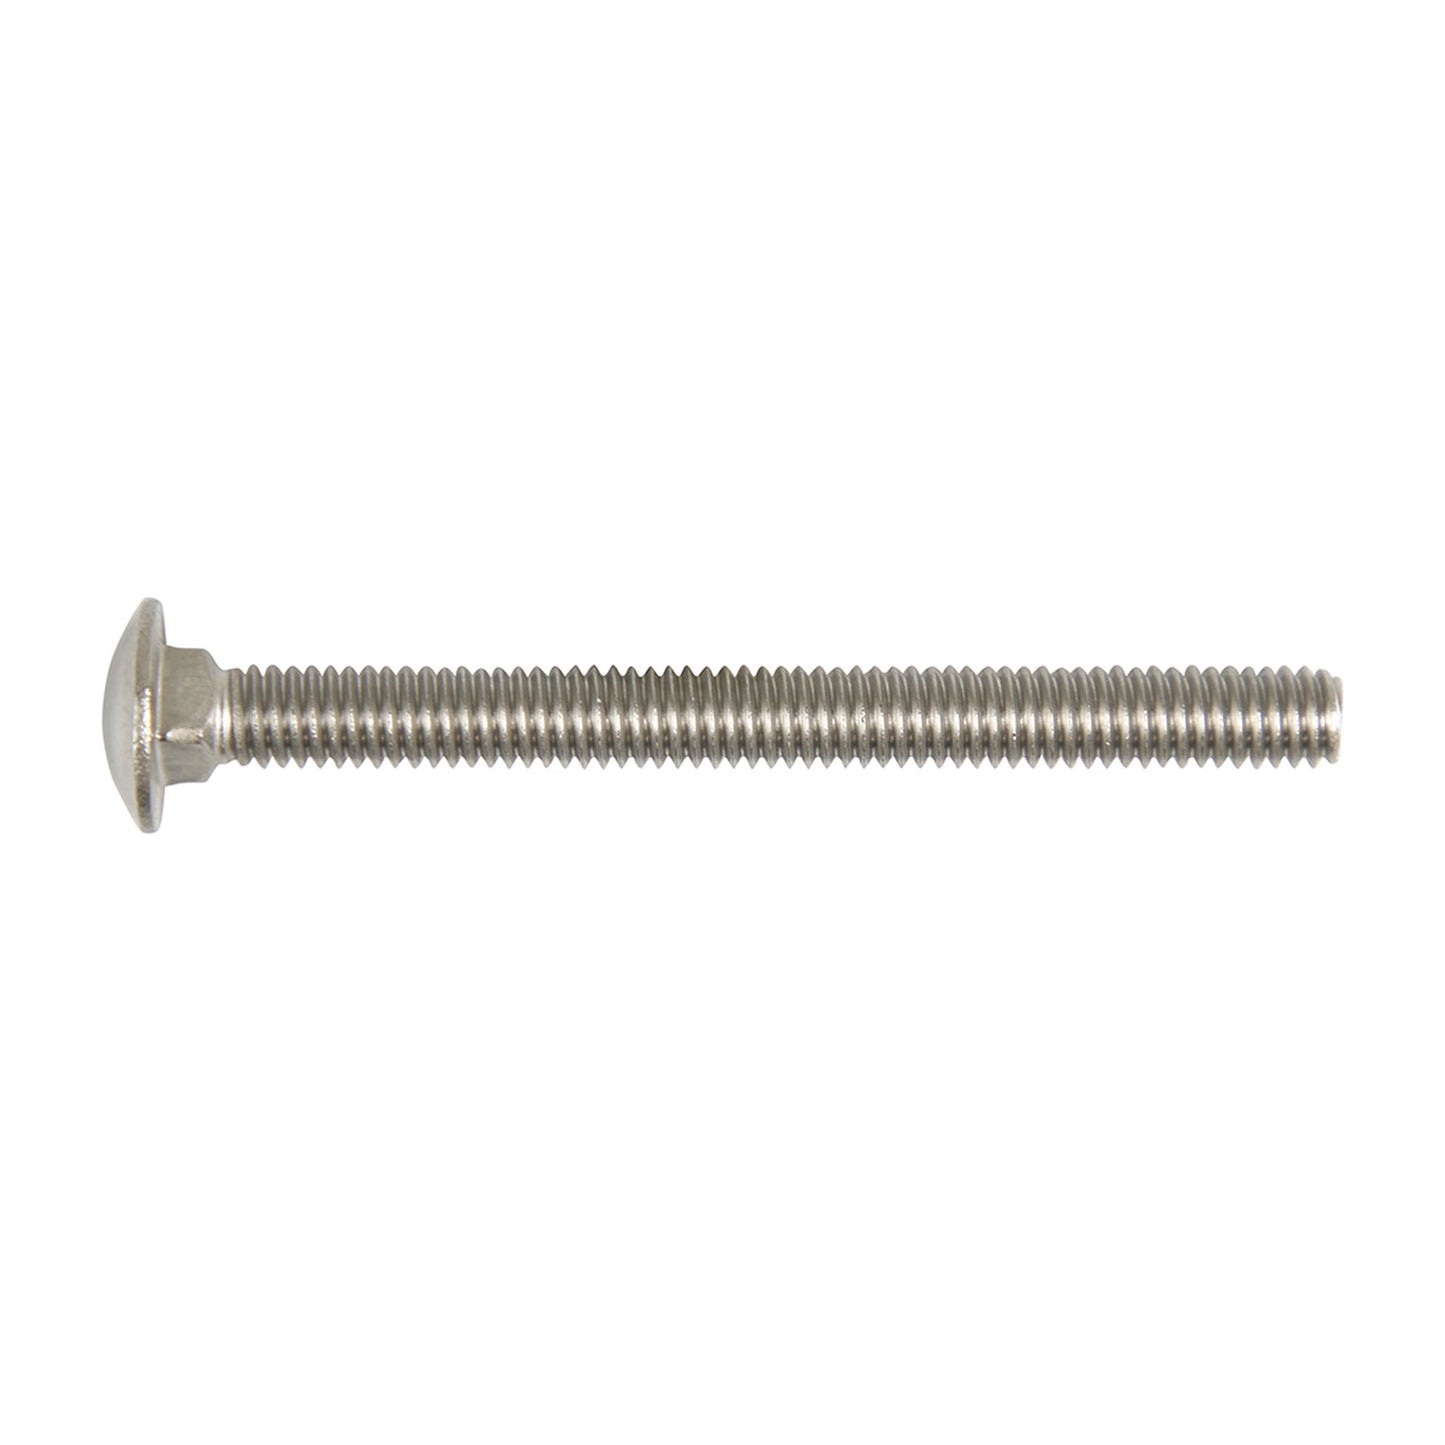 5/16"-18 x 3-1/2" Conquest Carriage Bolt - 304 Stainless Steel